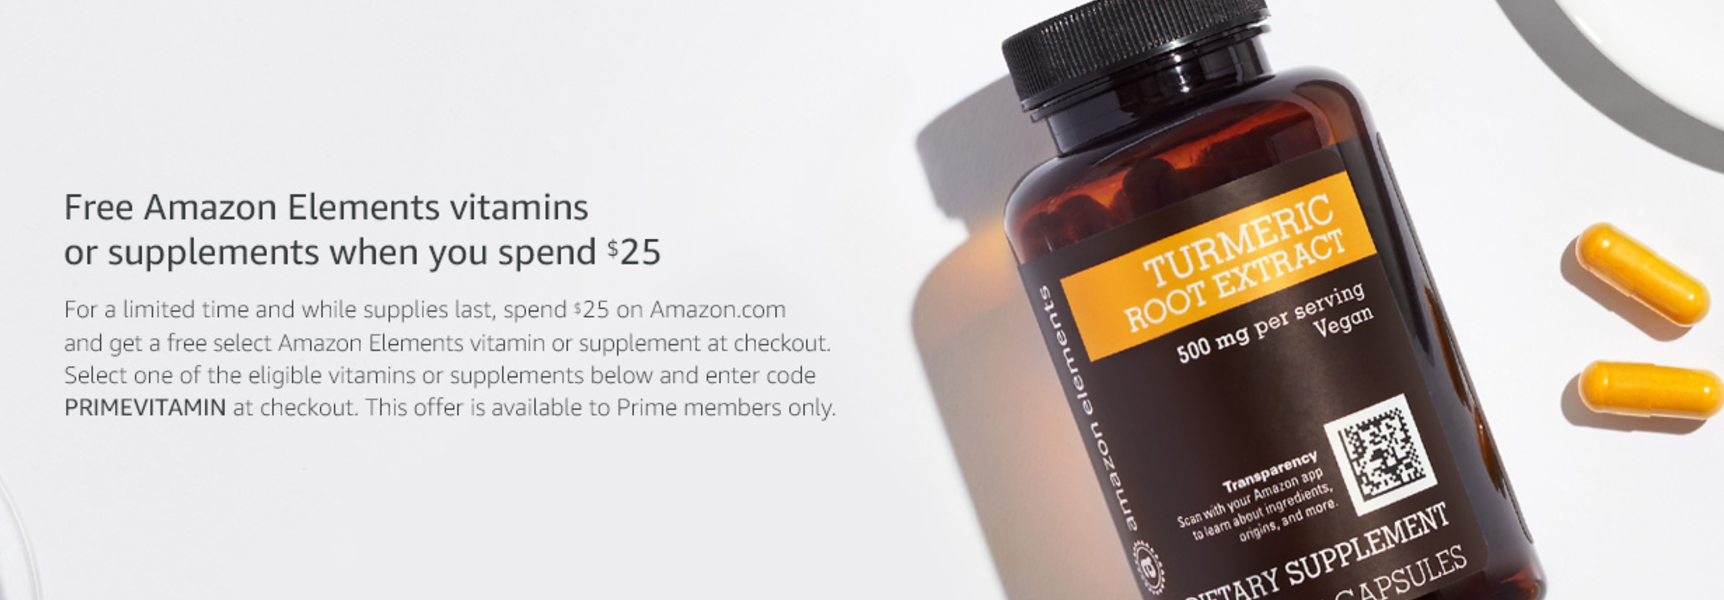 FREE Snack or Vitamins When You Spend $25 or More at Amazon!